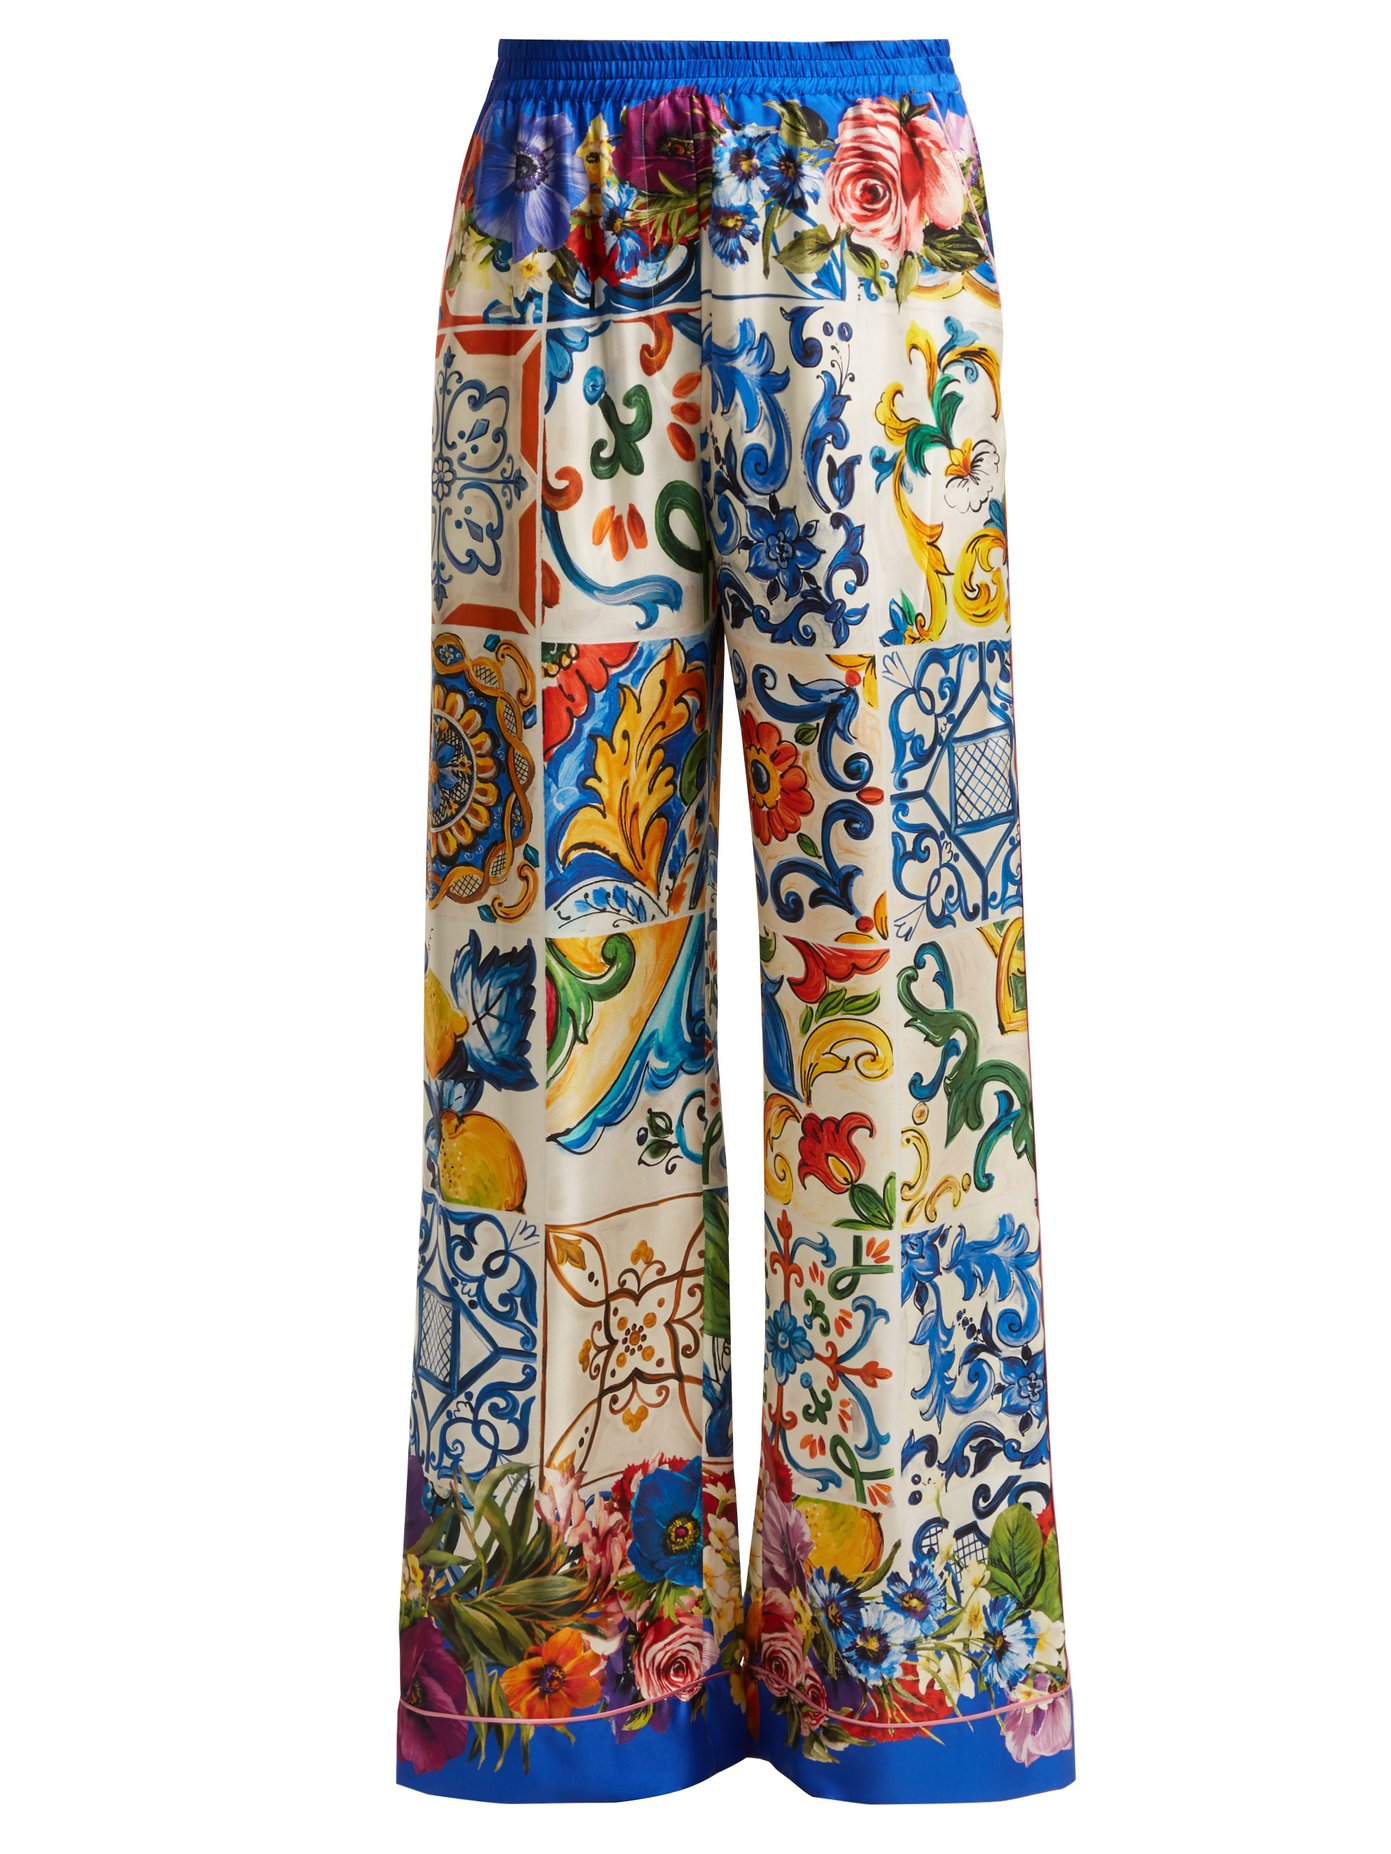 dolce and gabbana floral pants